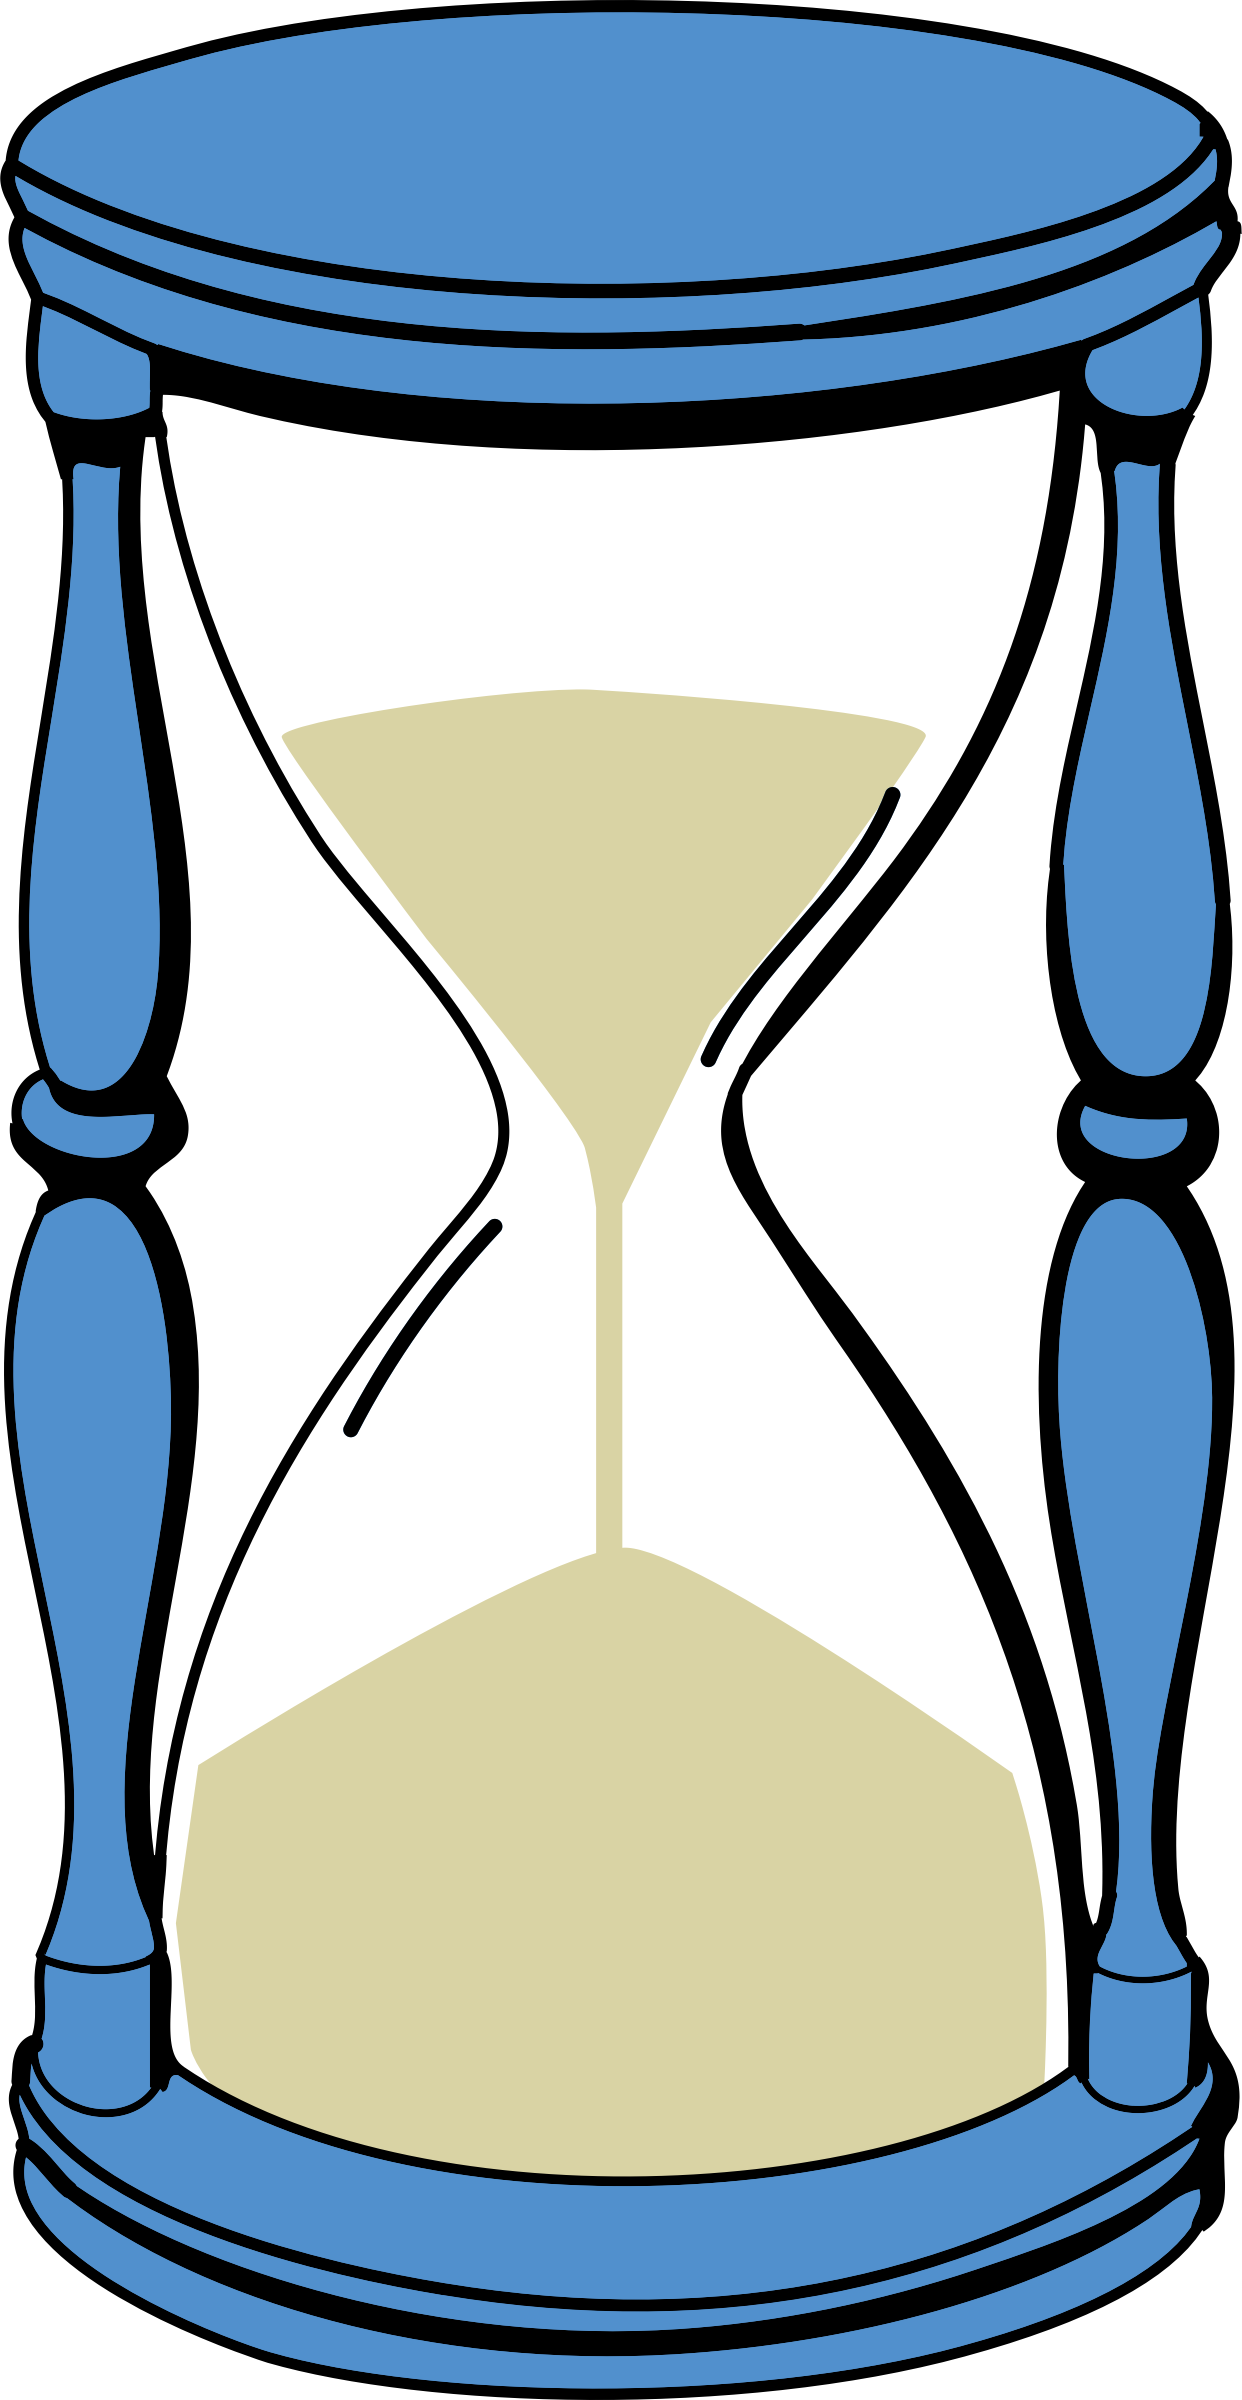 Download PNG image - Sand Animated Hourglass PNG Clipart 